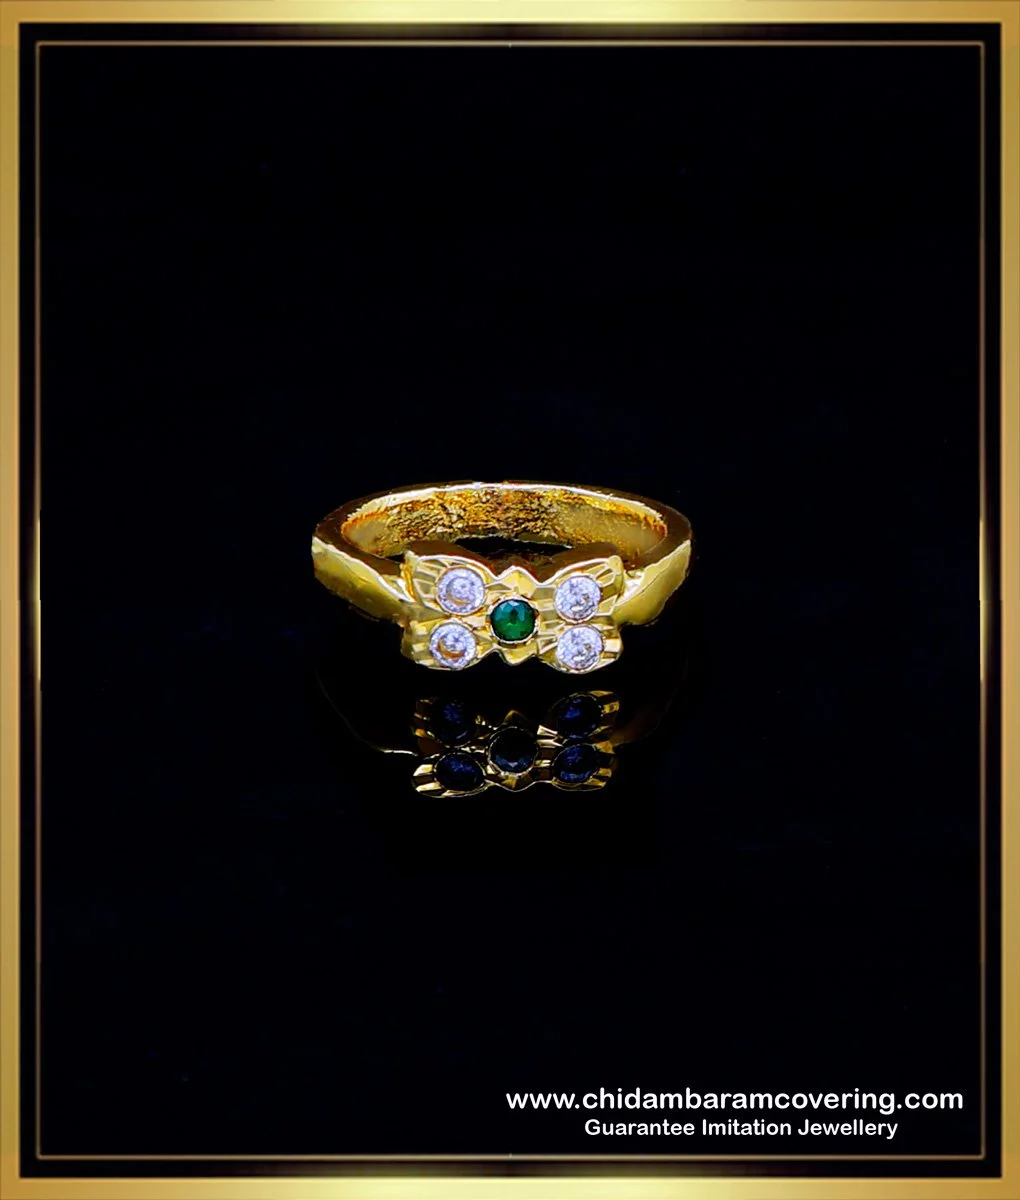 Traditional Gold Rings - Manufacturer & Wholesaler of Designer Diamond  Jewelry